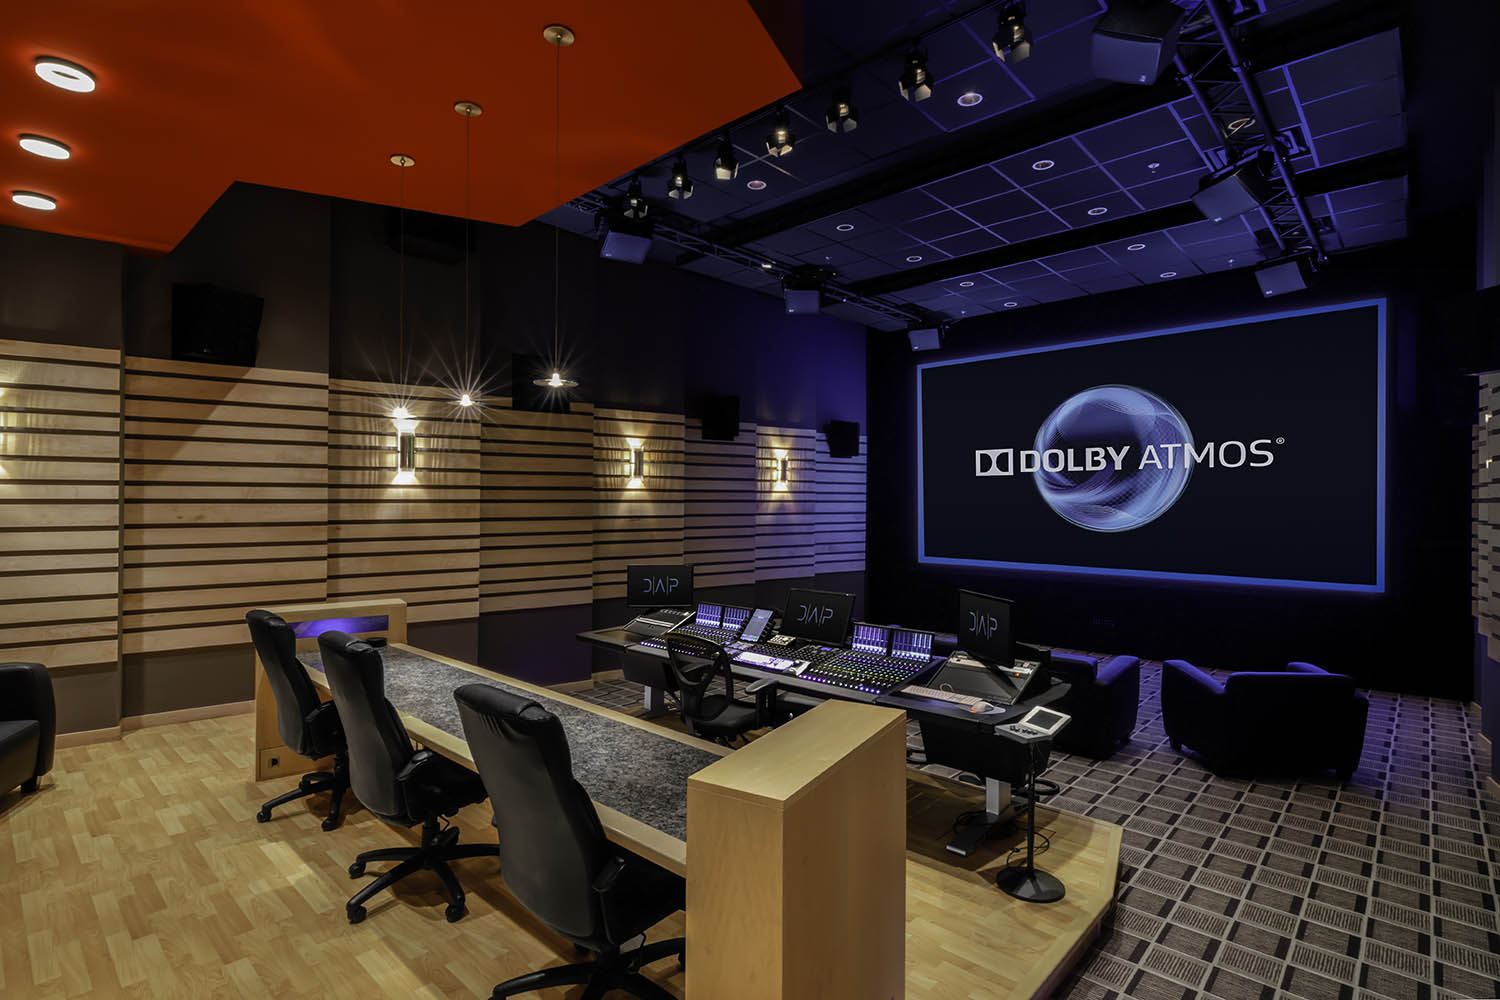 Dallas Audio Post Opens Dolby Atmos Capable Mixing Stage